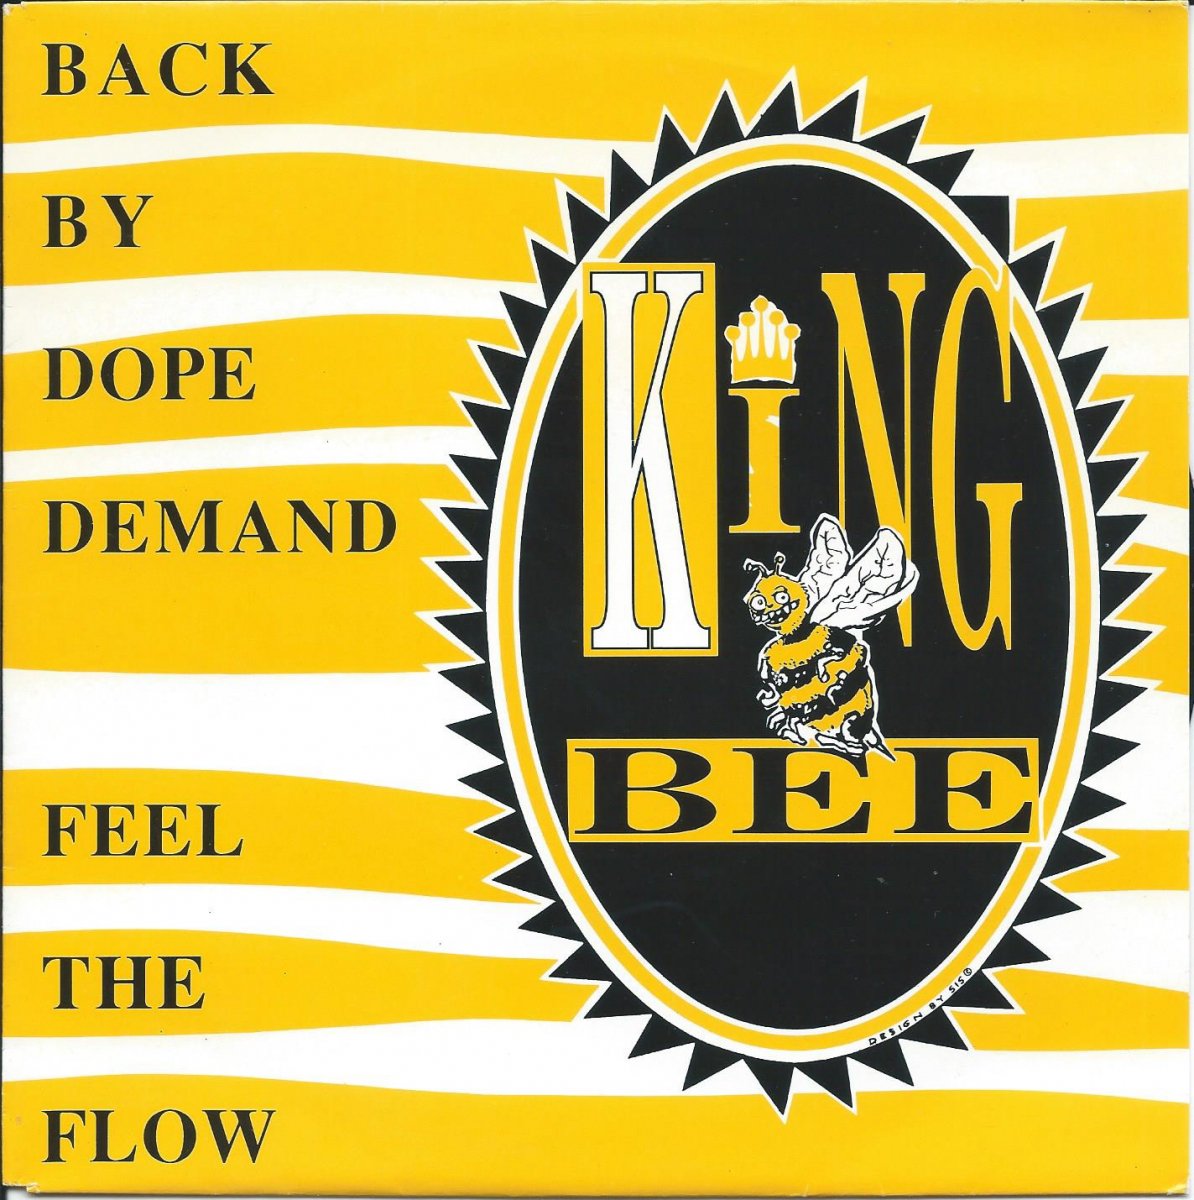 KING BEE / BACK BY DOPE DEMAND / FEEL THE FLOW (7